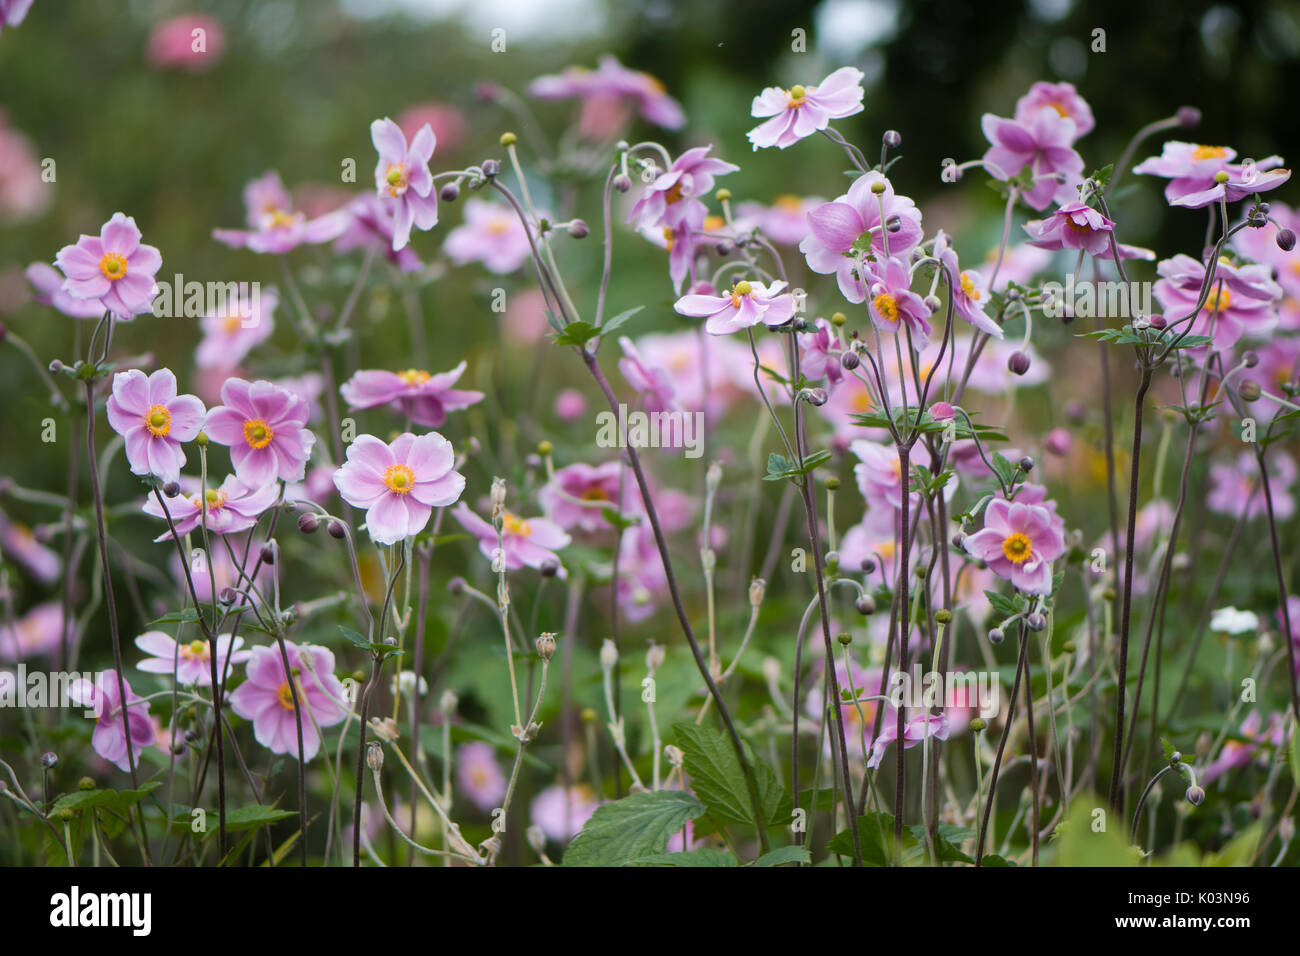 Japanese anemone (Anemone hupehensis) plants in flower. Pink garden plant in the family Ranunculaceae, aka Chinese anemone, thimbleweed or windflower Stock Photo